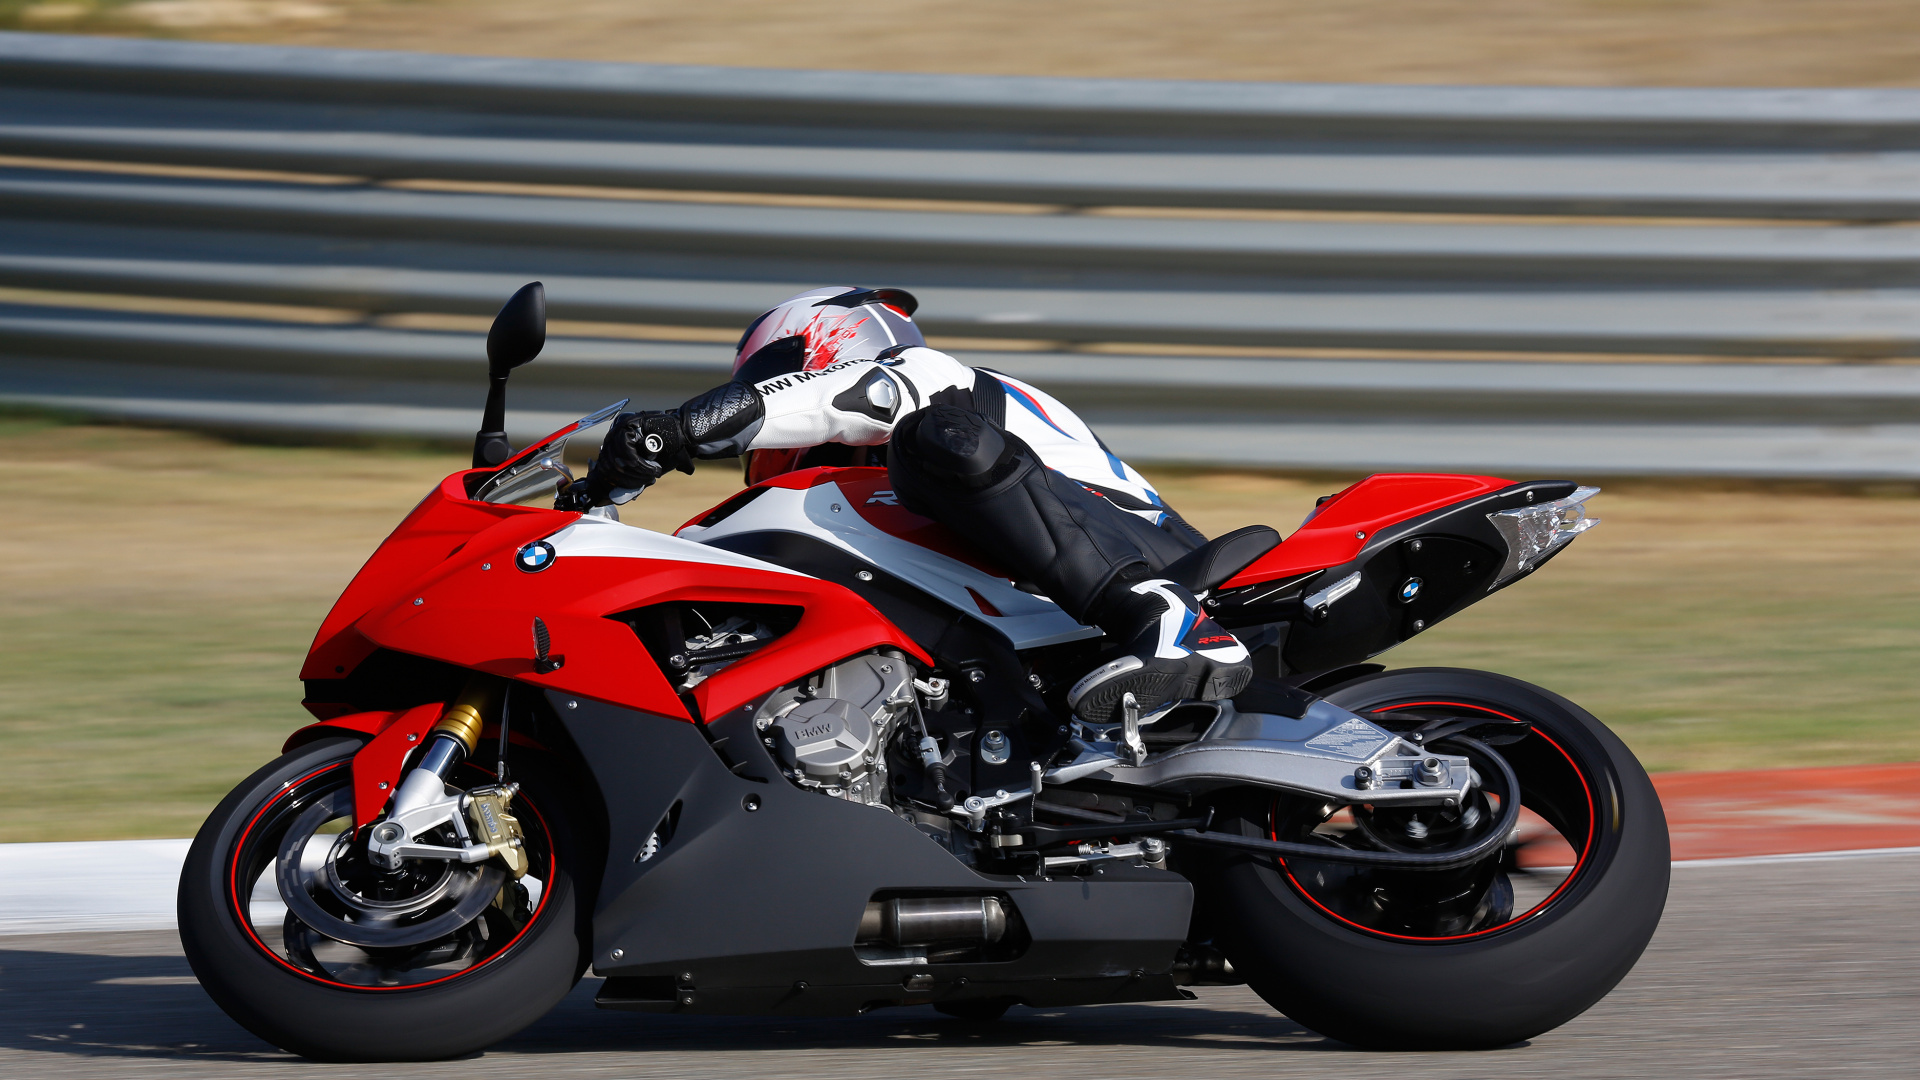 Man in Black and Red Sports Bike Helmet Riding on Red and Black Sports Bike. Wallpaper in 1920x1080 Resolution